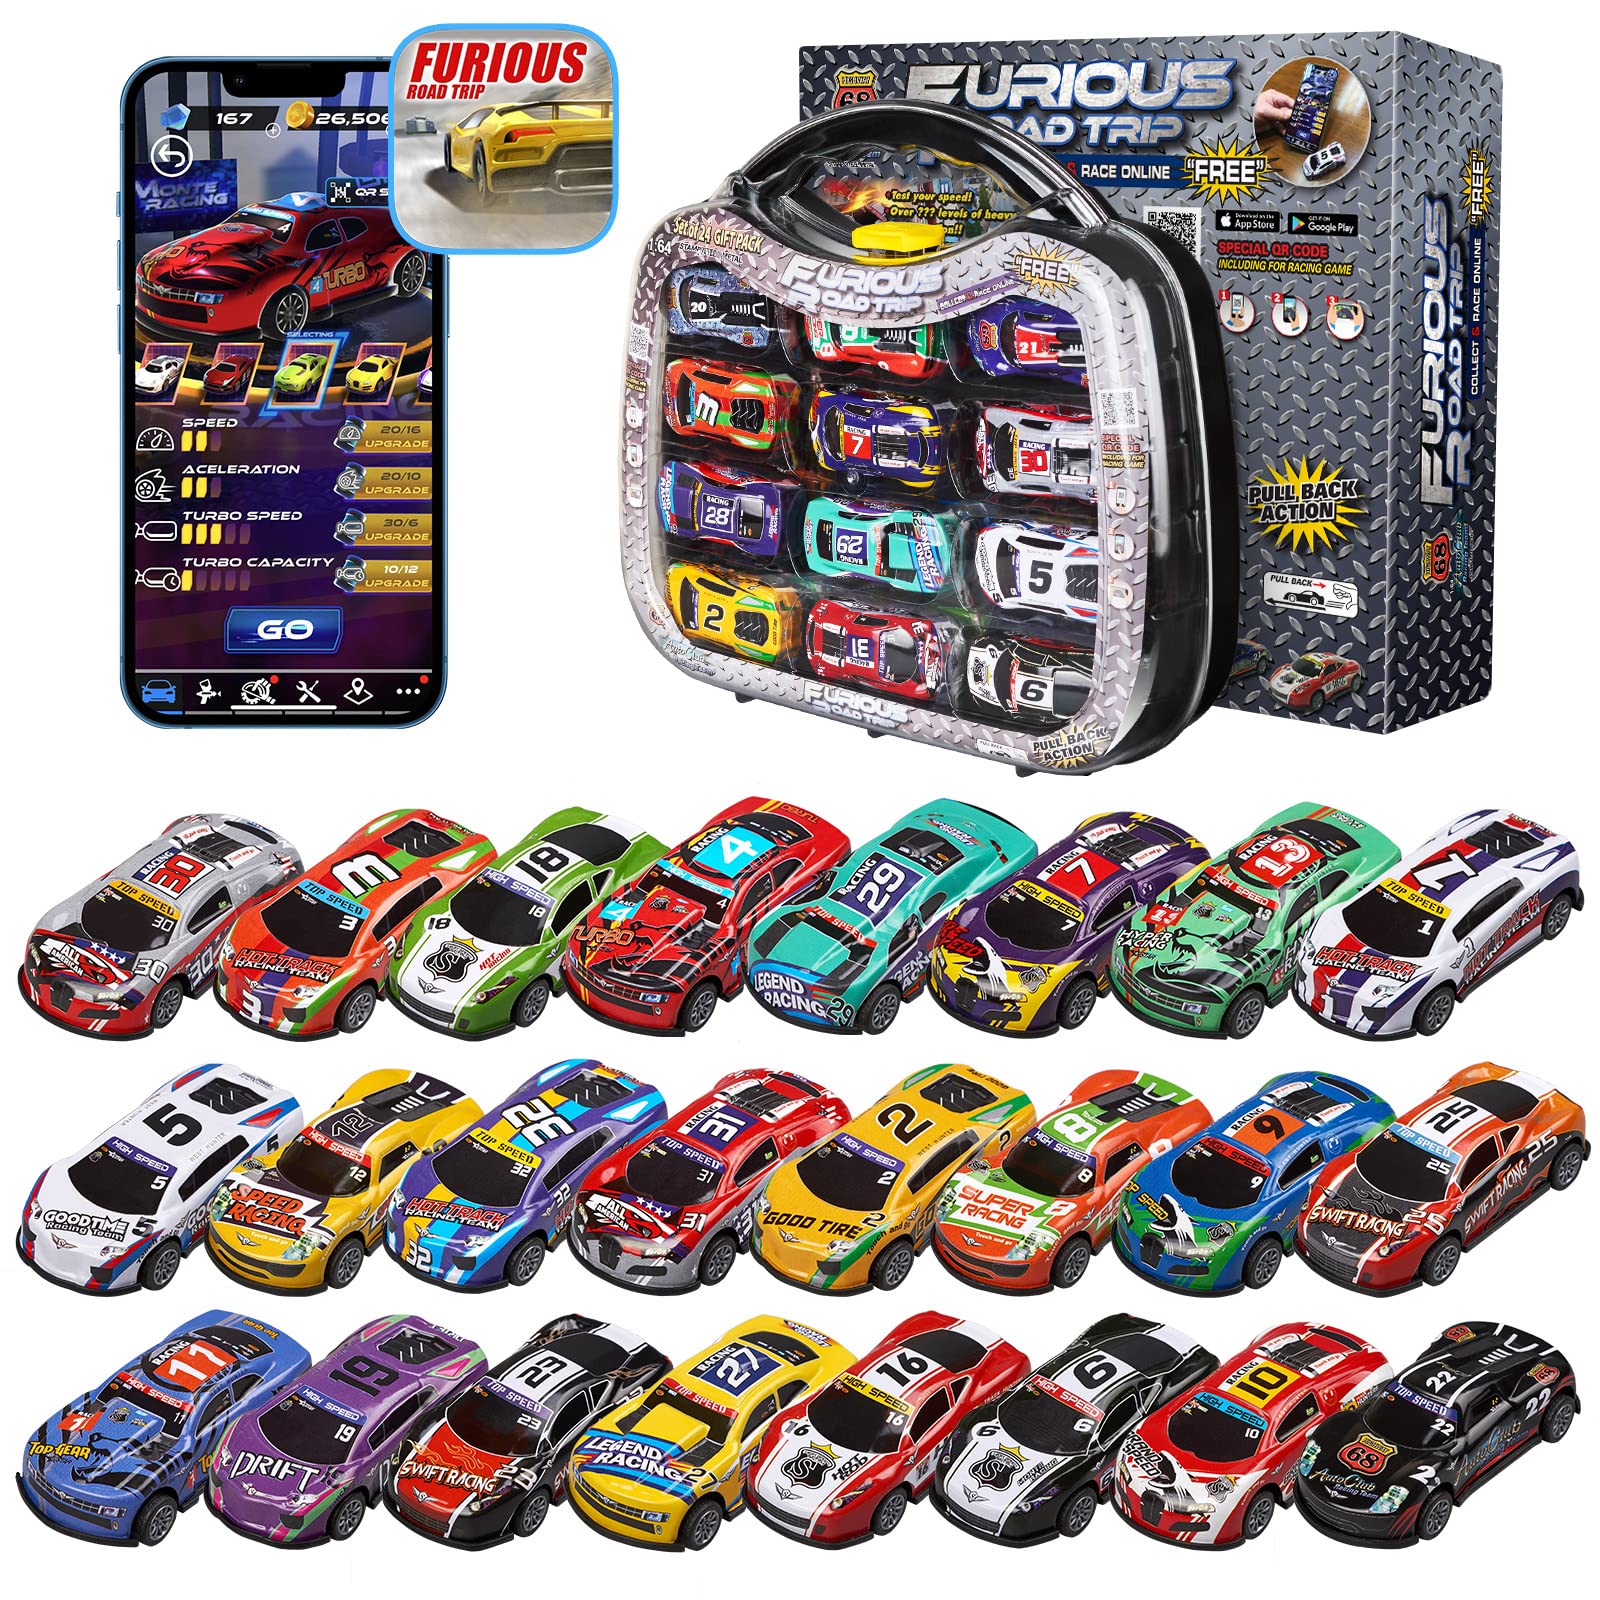 GOLDEN WHEEL 24 Race Cars Pack - 1:64 Vehicles Die-cast Metal Mini Pull Back Cars Set with Storage Case & Free Online Games - 2022 Hot Toy Birthday Party Gift for Kids Ages 3+ Years Old